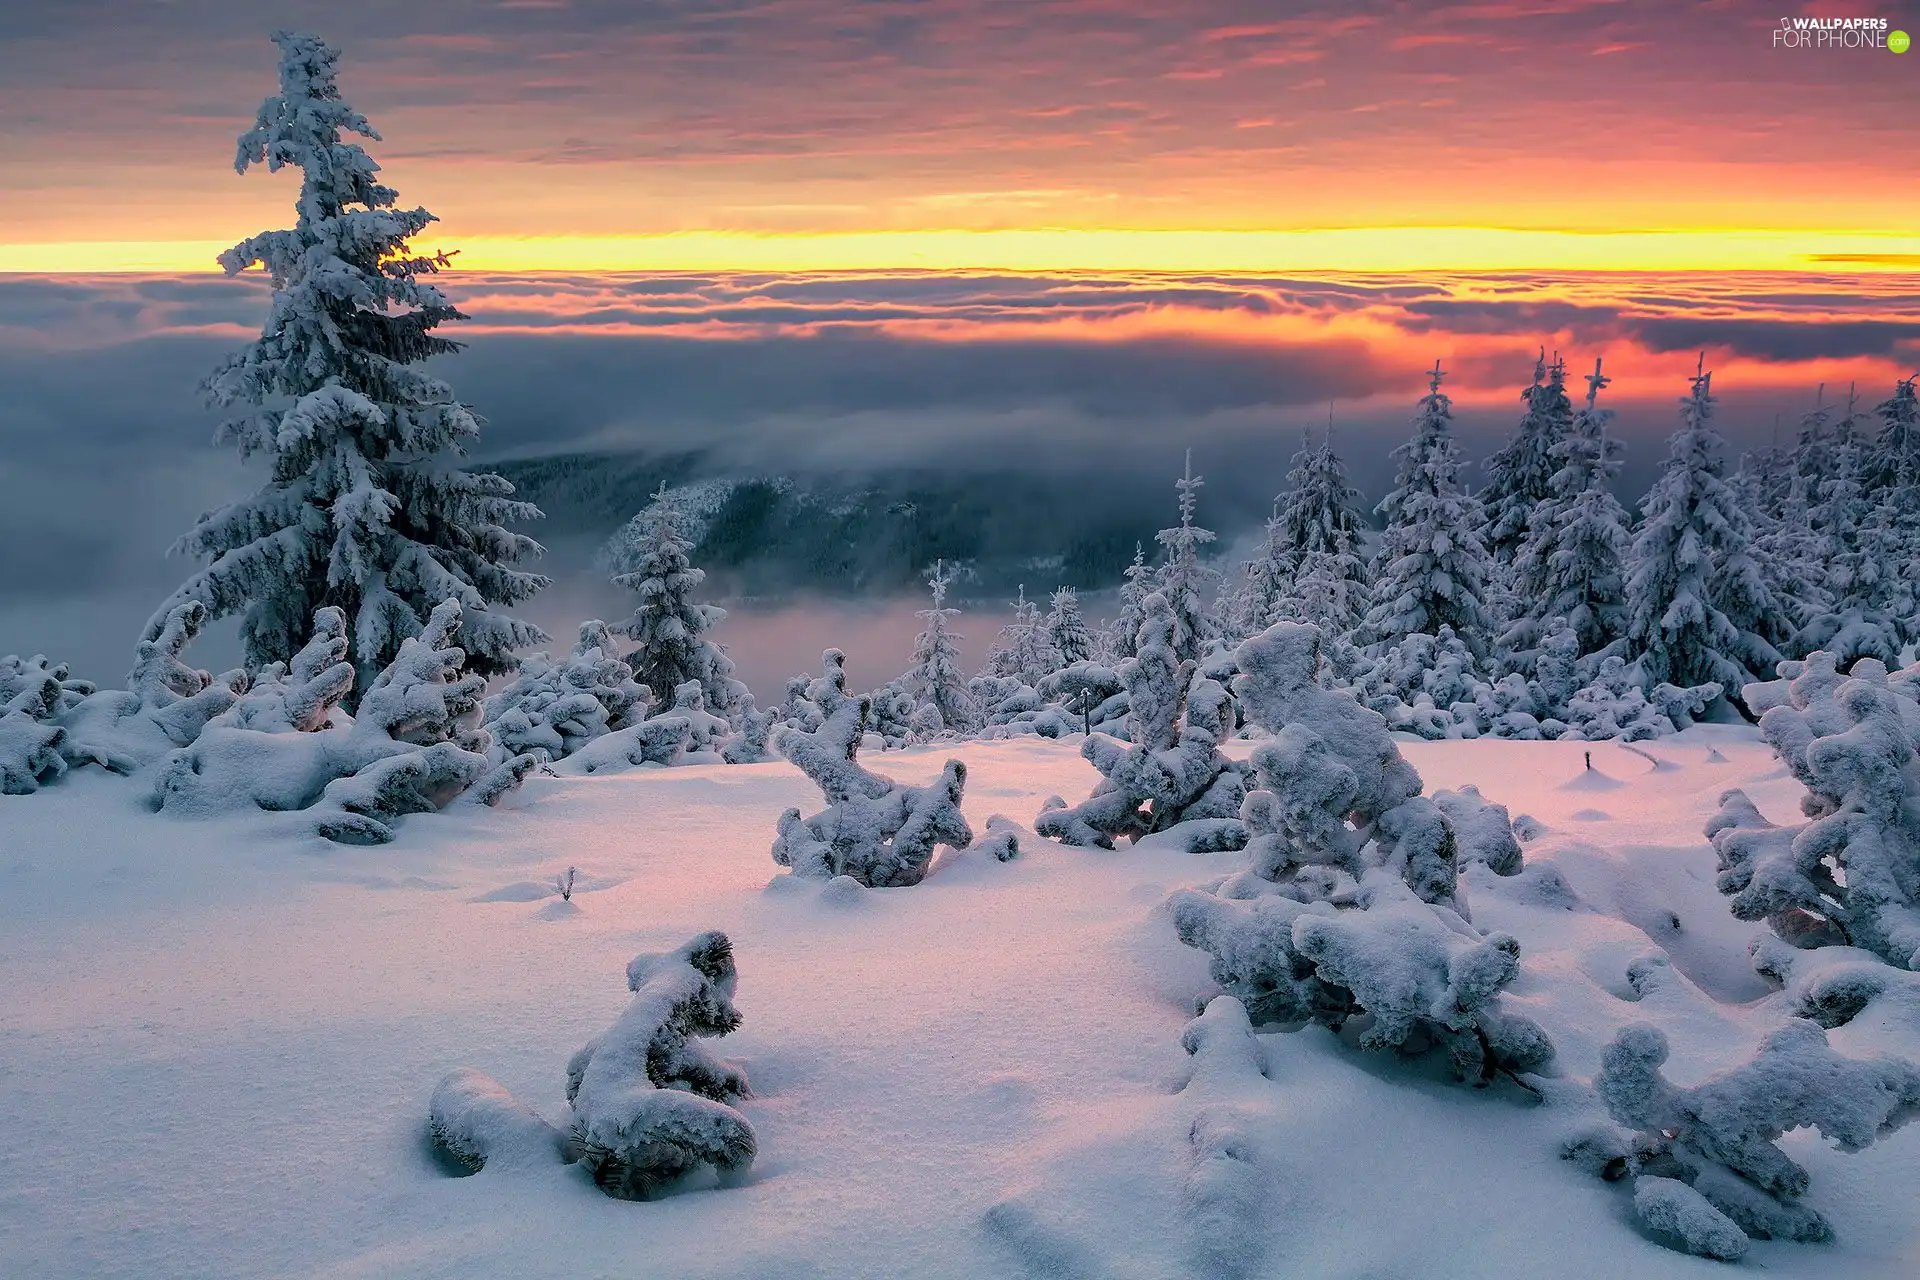 trees, Great Sunsets, Spruces, Snowy, winter, viewes, Plants